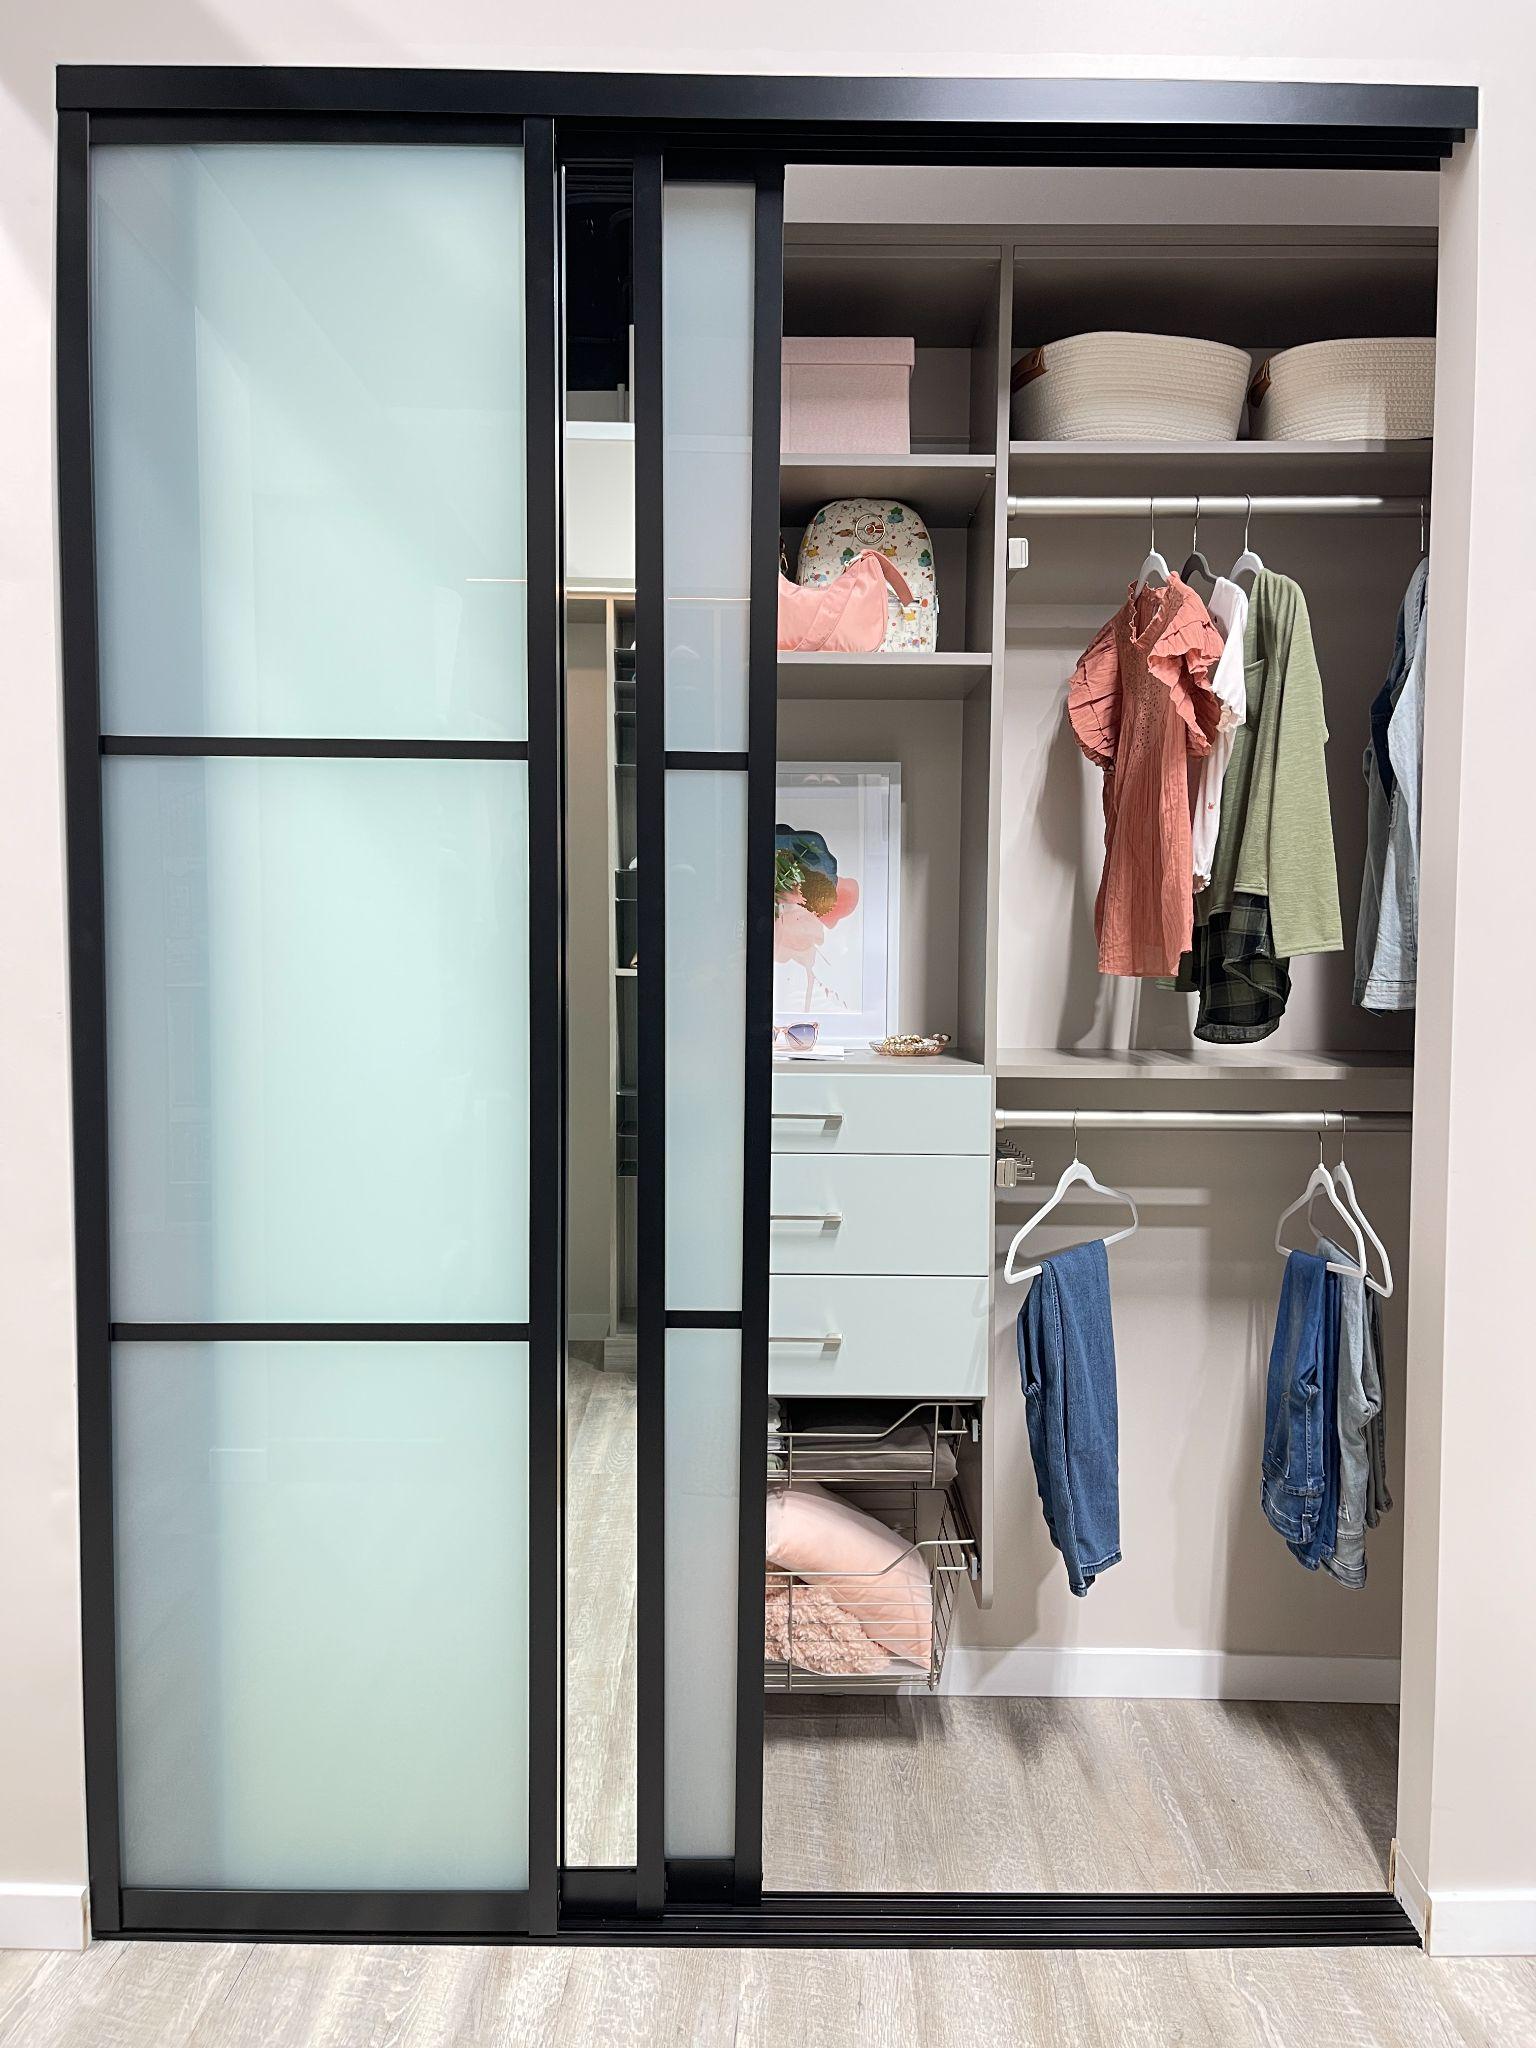 A sliding glass closet door with frosted panes half open to reveal an interior closet organizer